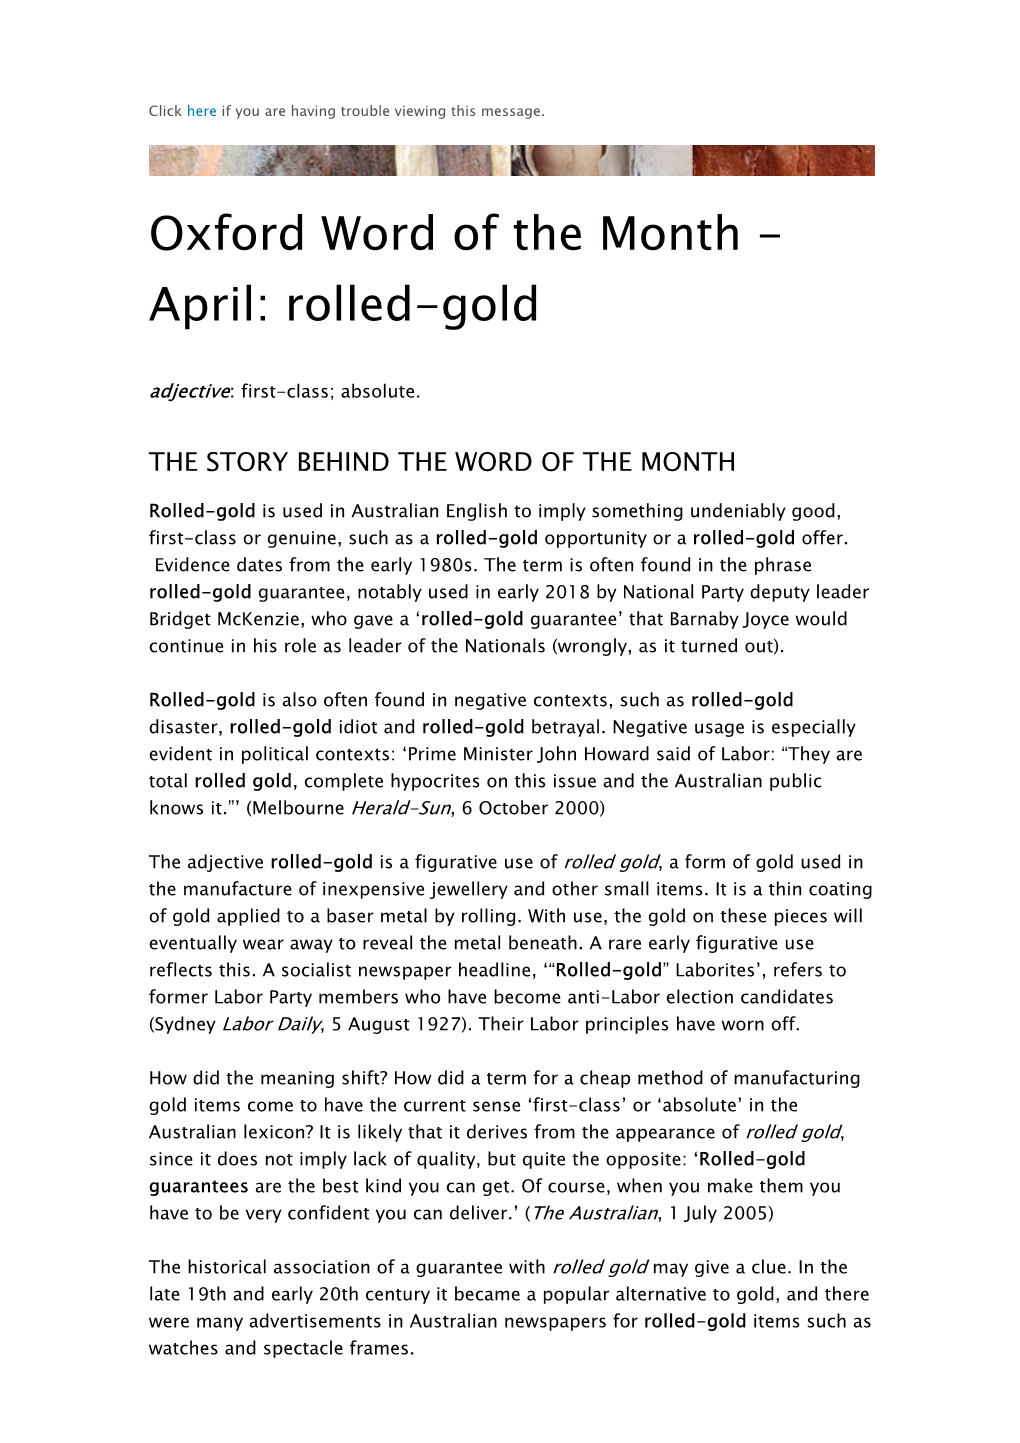 Oxford Word of the Month - April: Rolled-Gold Adjective: First-Class; Absolute